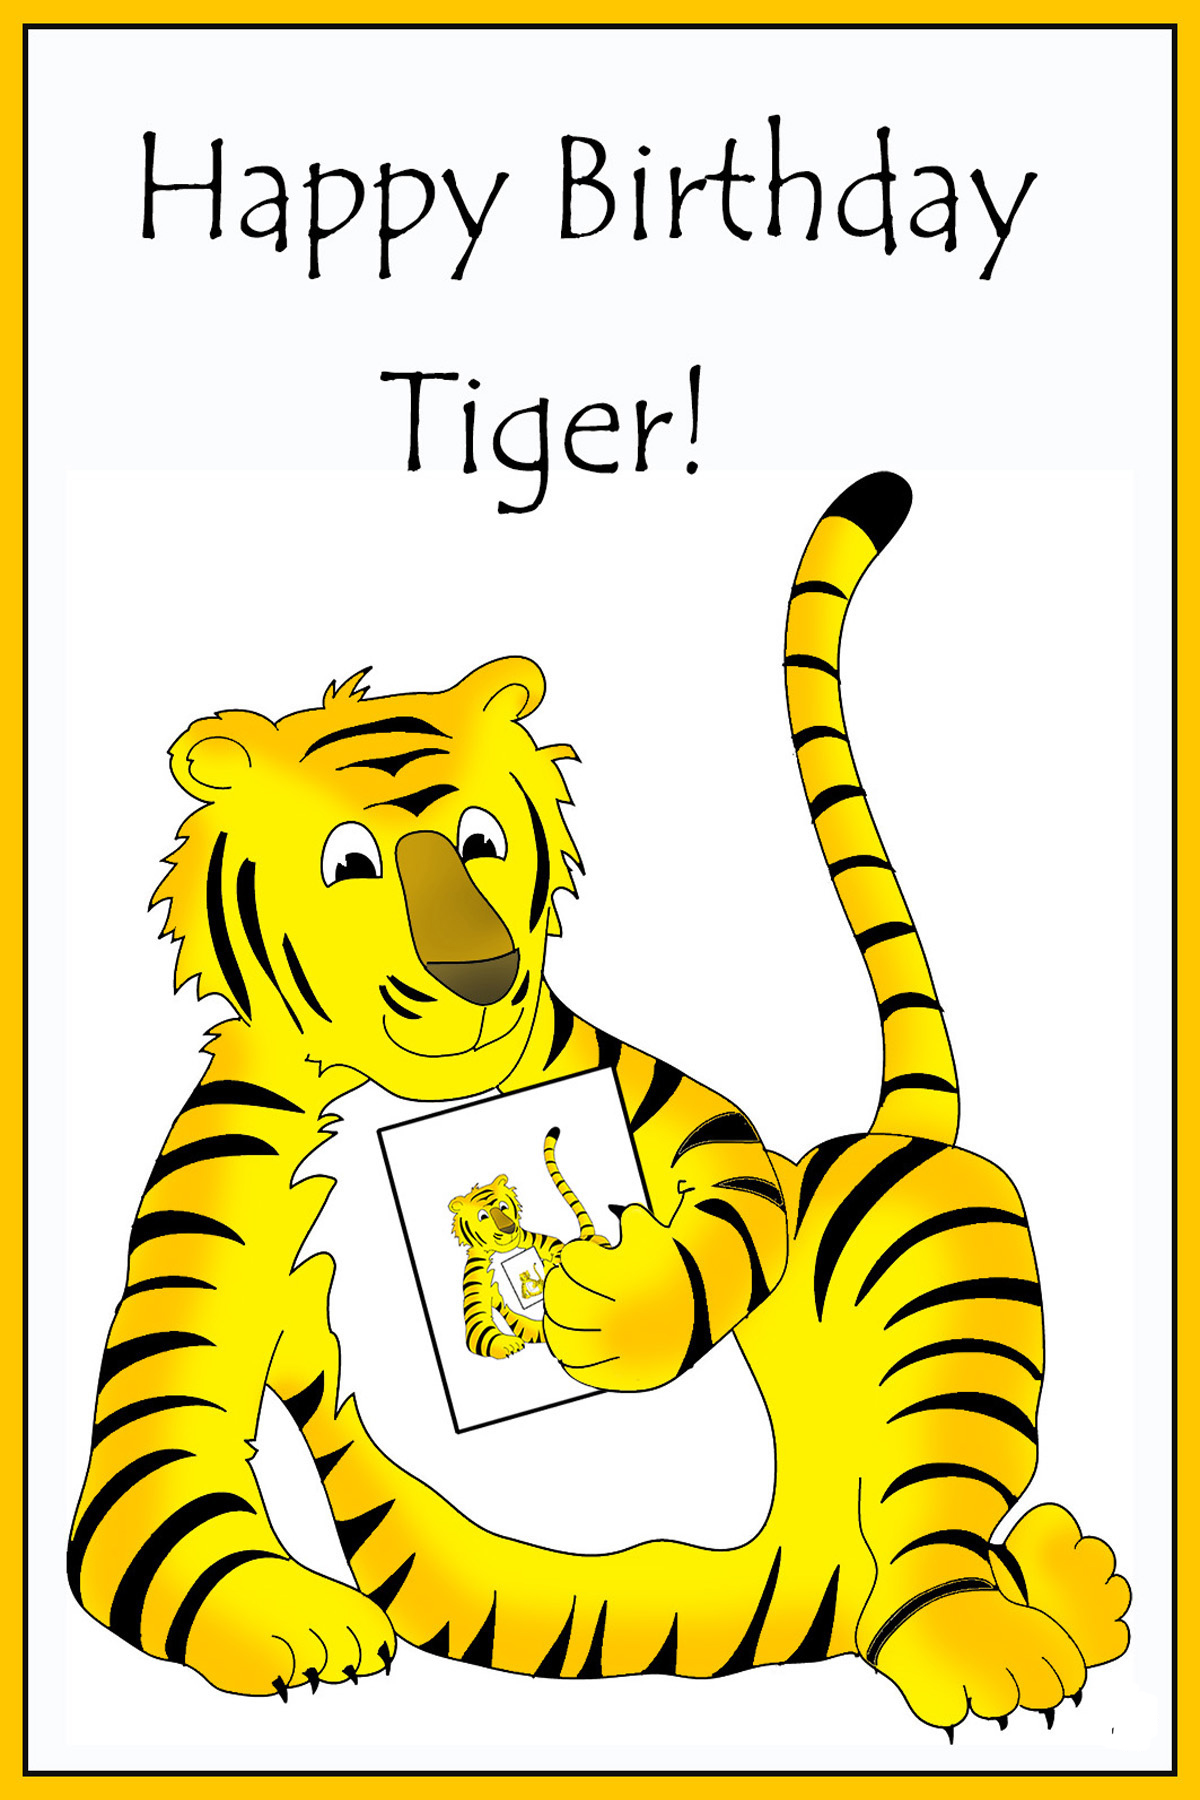 printable birthday card with a tiger for kids